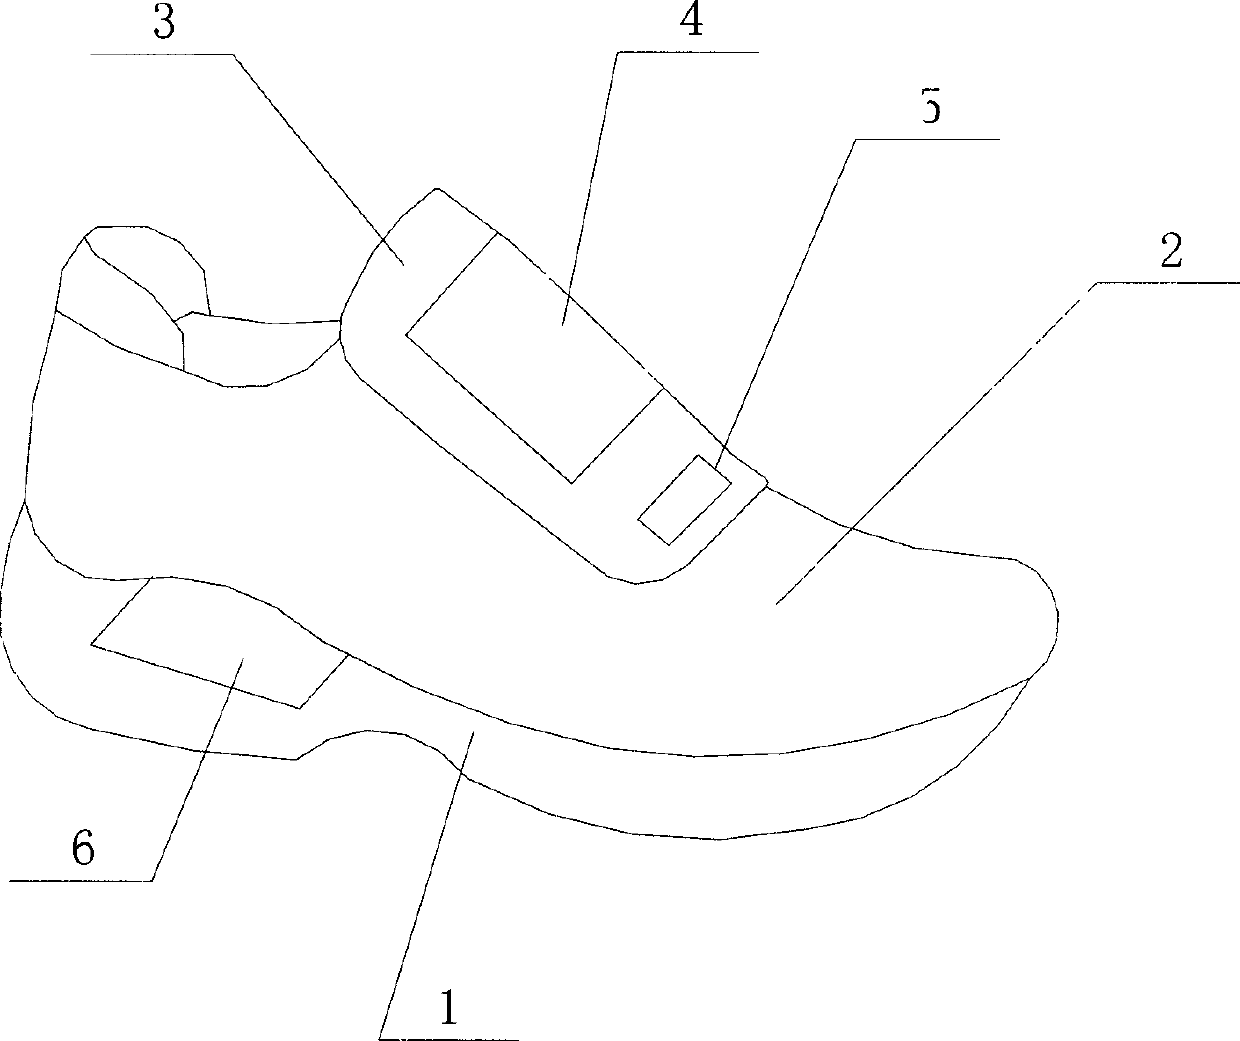 Lightweight fitness shoe capable of measuring heartbeat, step number and body weight in unit time